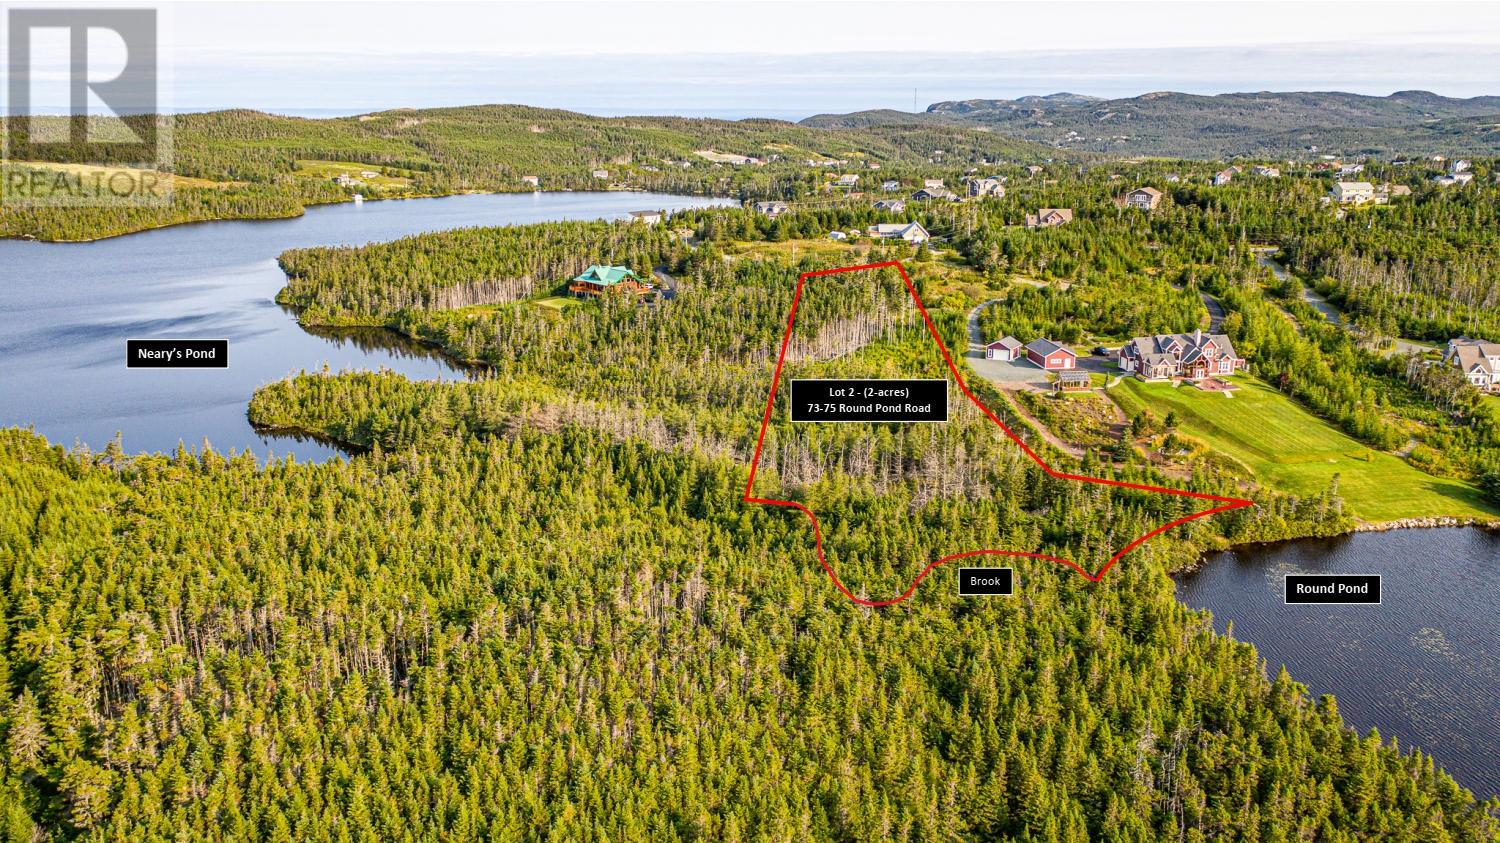 73-75 Round Pond Road, Portugal Cove-St. Philip's, A1M2Z4, ,Vacant land,For sale,Round Pond,1267668